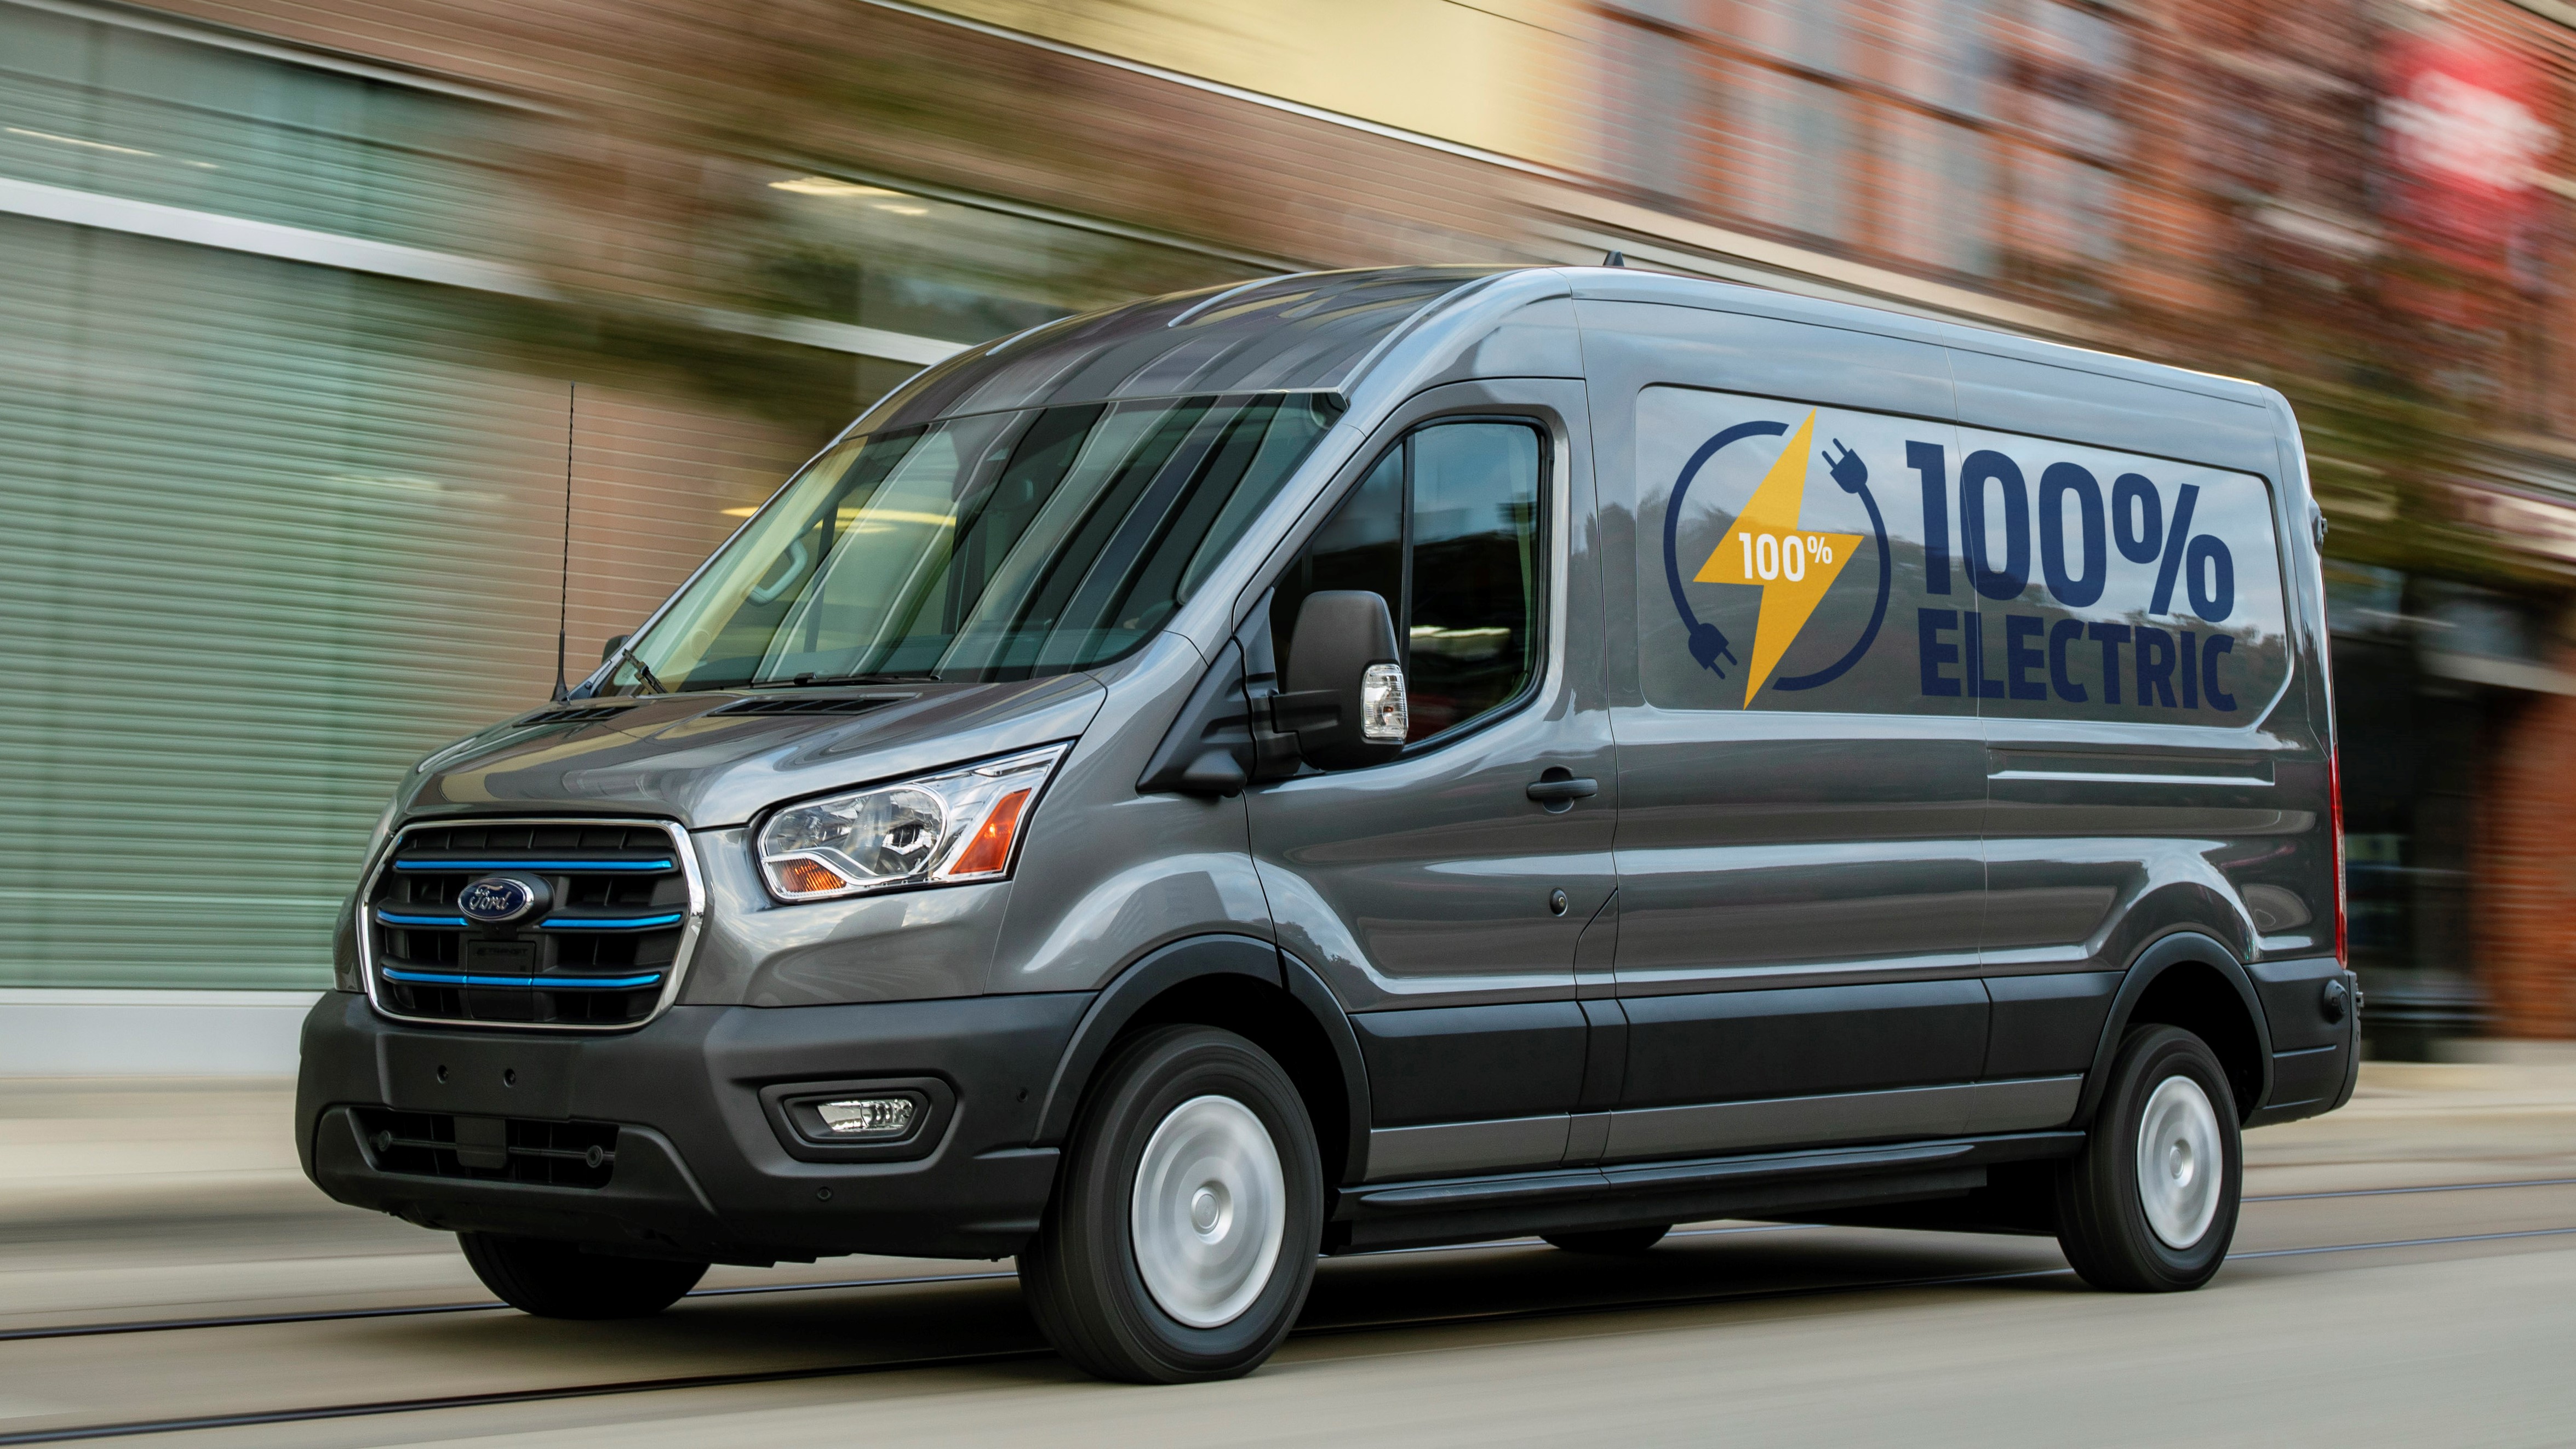 Ford Provides Details On All-Electric 2022 E-Transit Cargo Van Lineup